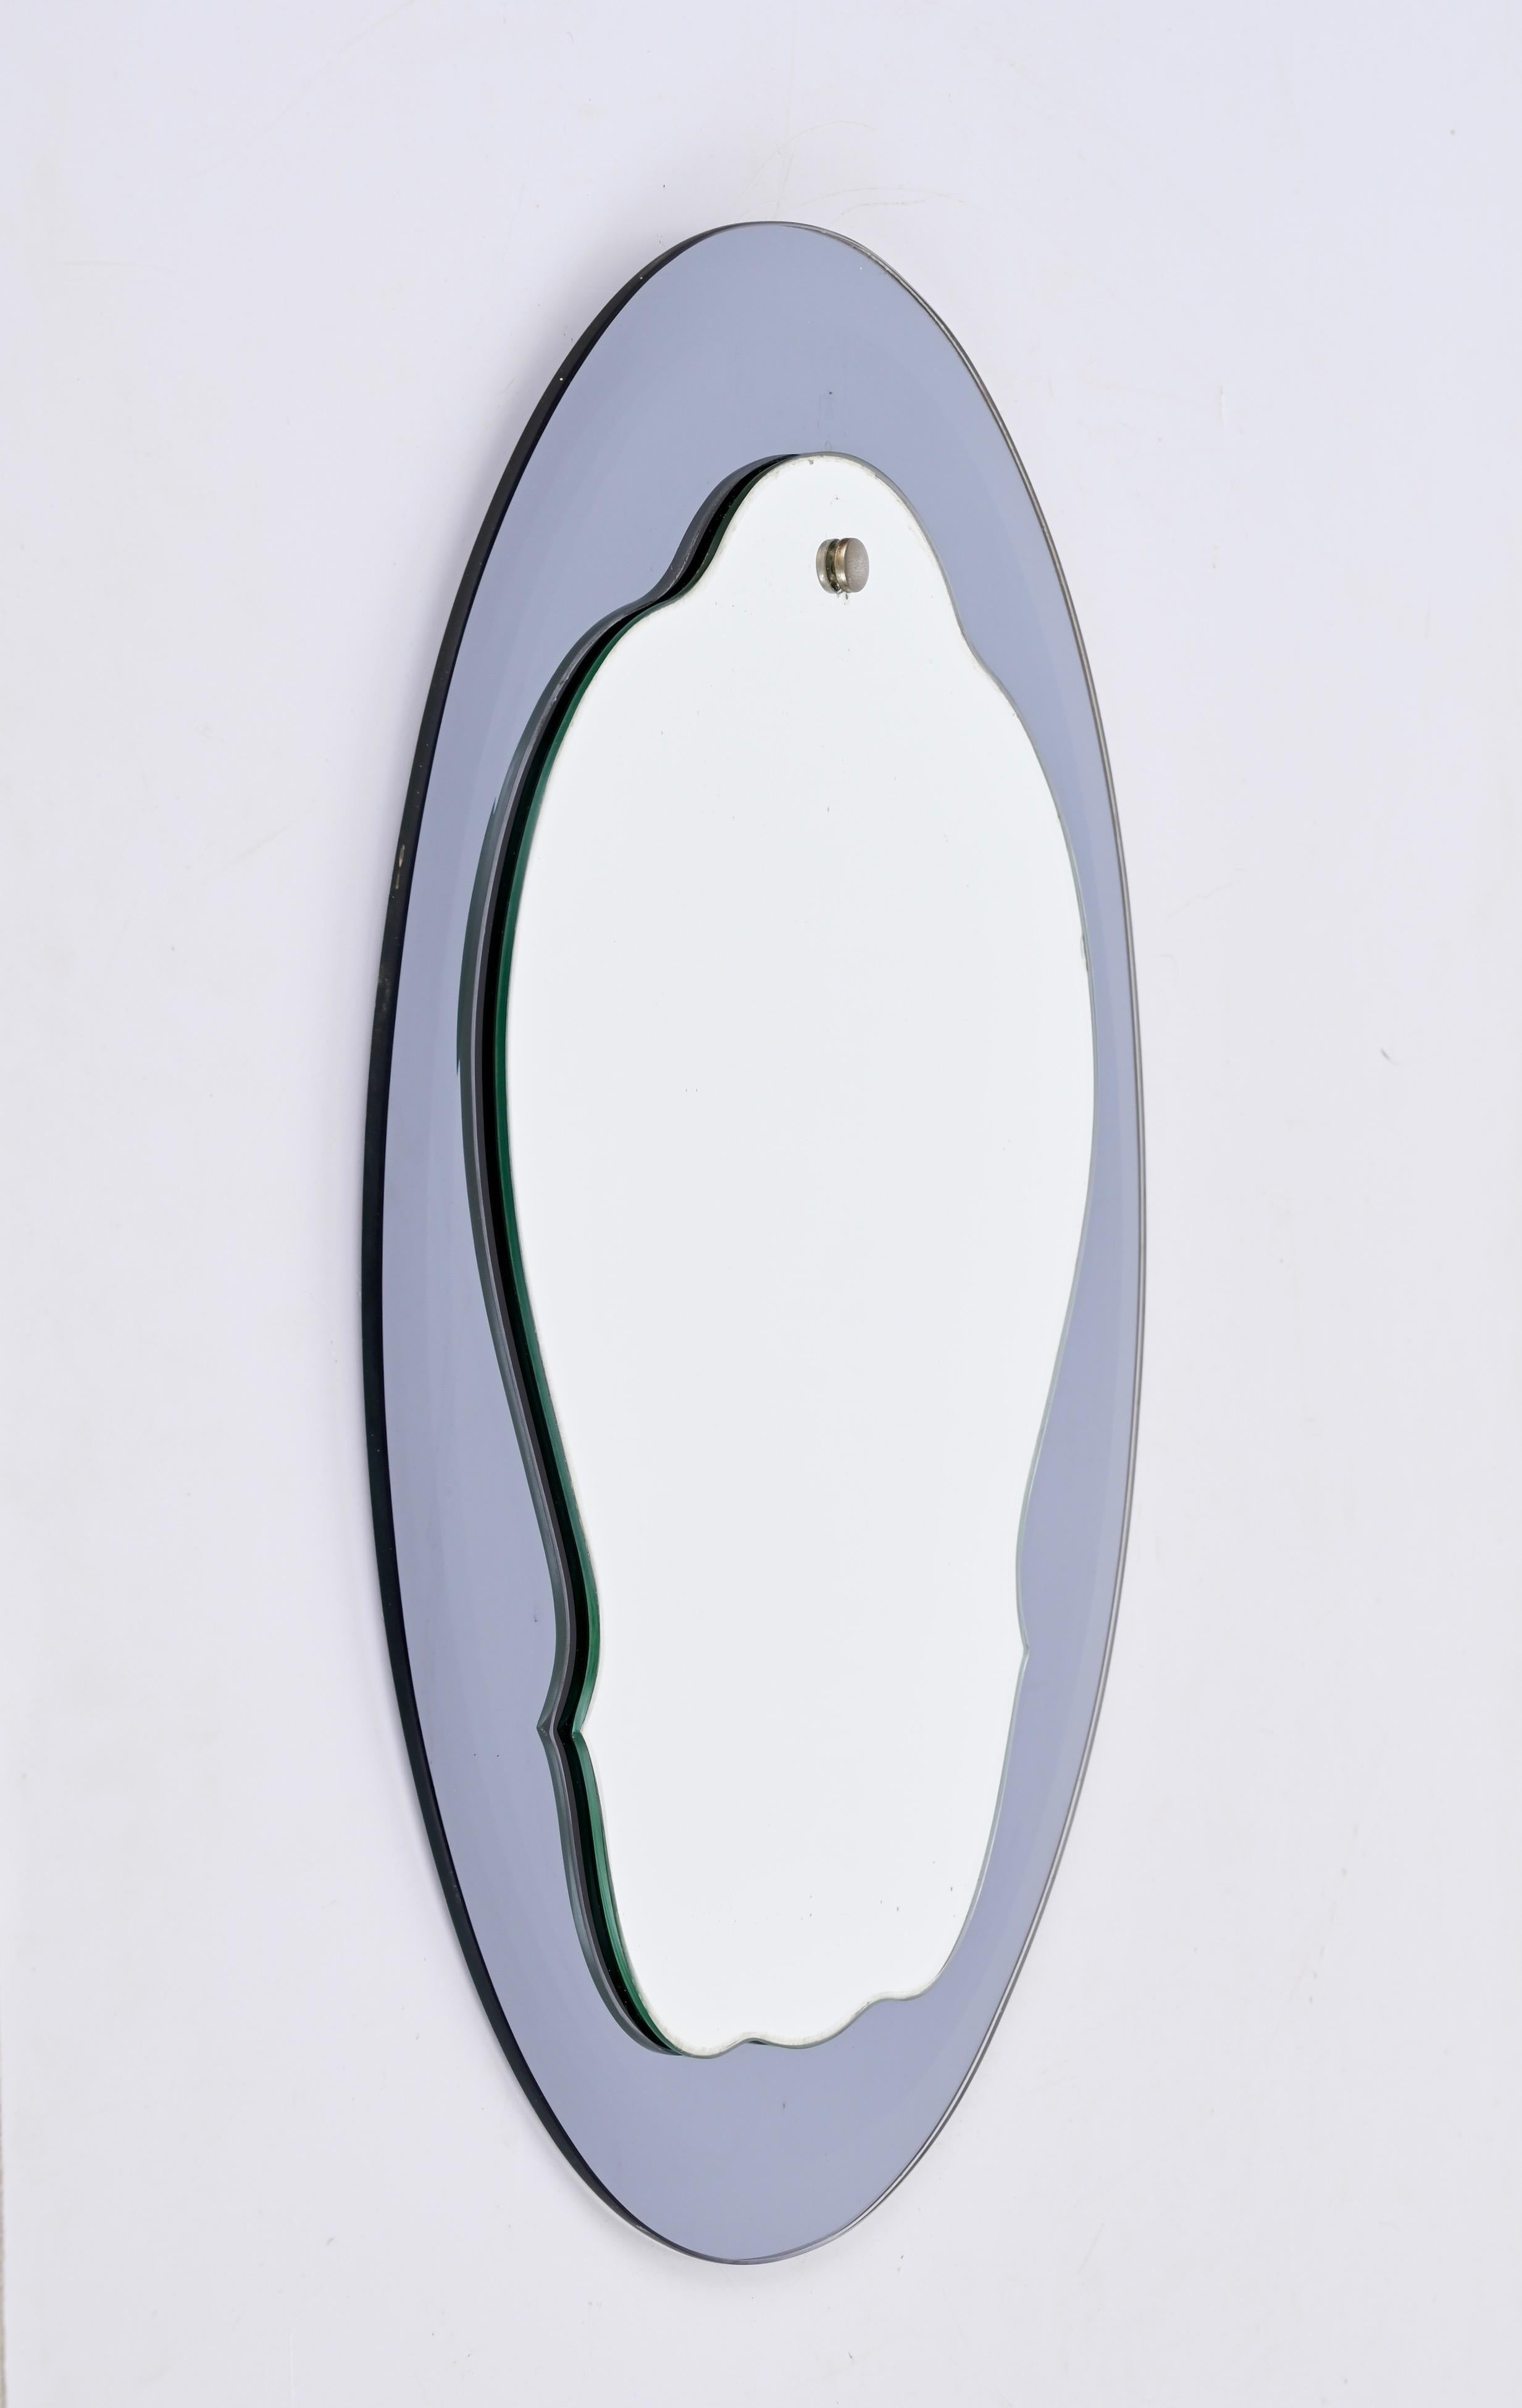 Midcentury Cristal Art Oval Italian Wall Mirror with Blue Glass Frame, 1960s For Sale 1